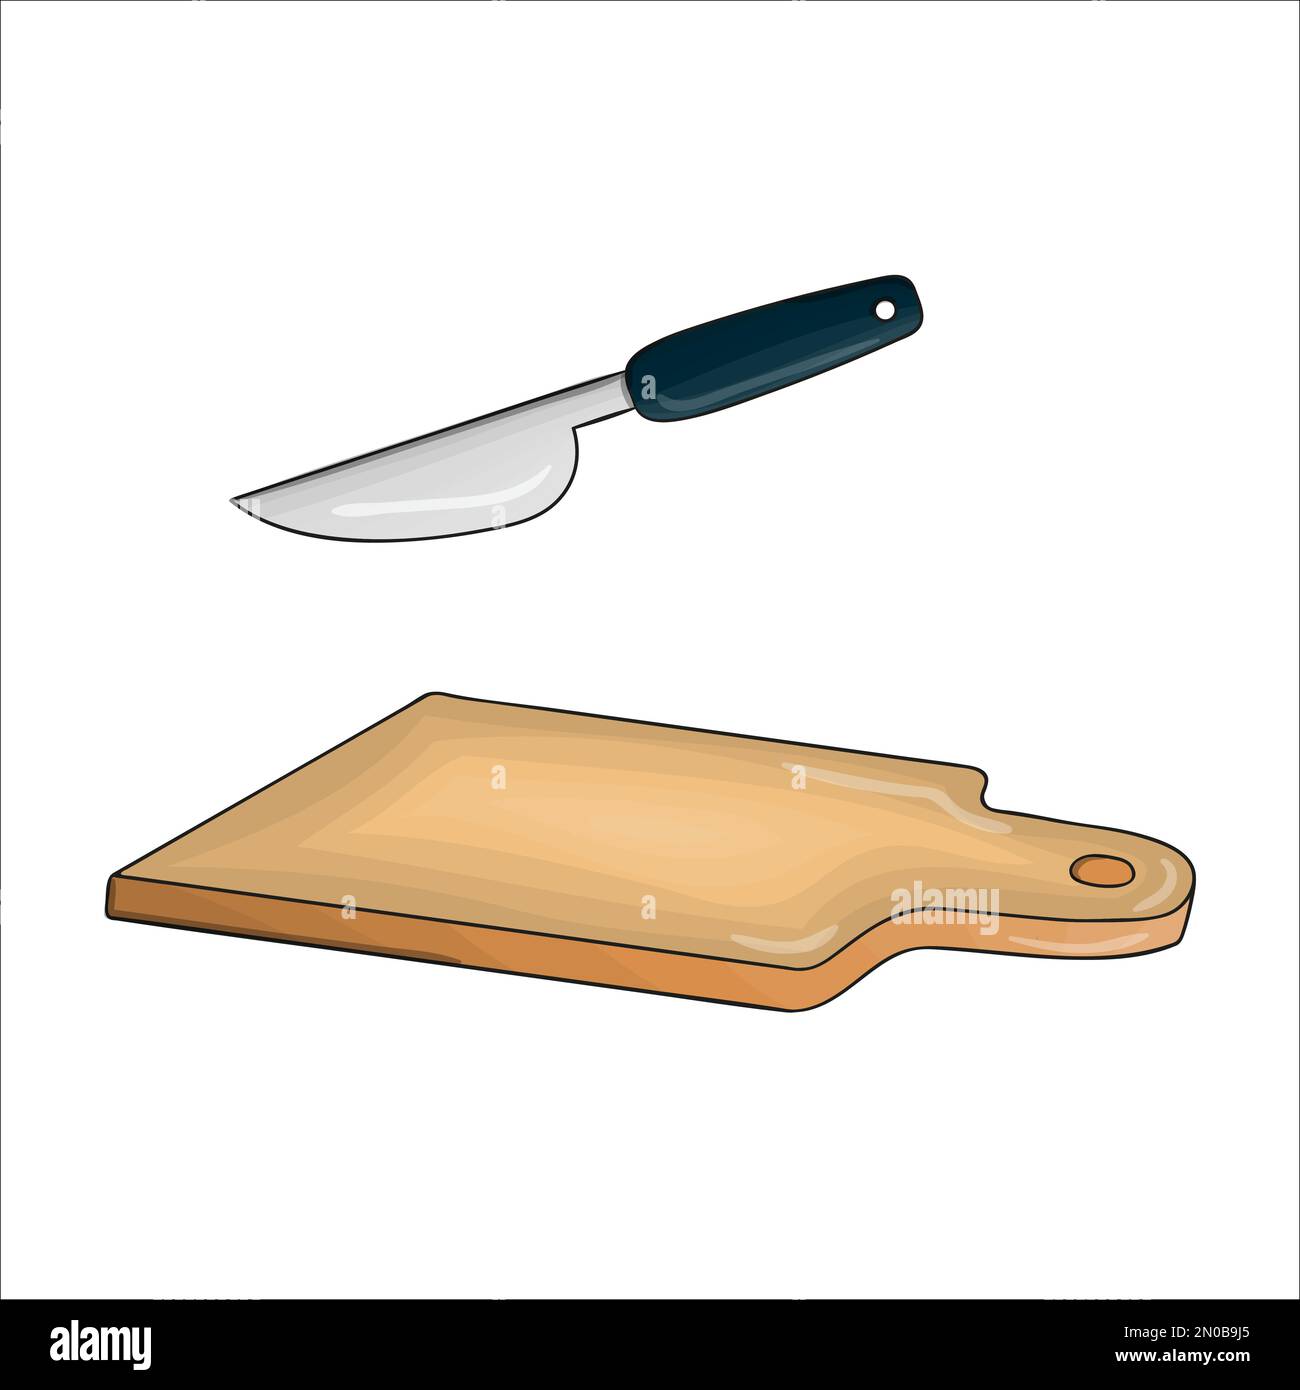 https://c8.alamy.com/comp/2N0B9J5/vector-colored-chopping-board-and-knife-kitchen-tool-icon-isolated-on-white-background-cartoon-style-cooking-equipment-dinnerware-vector-illustrati-2N0B9J5.jpg